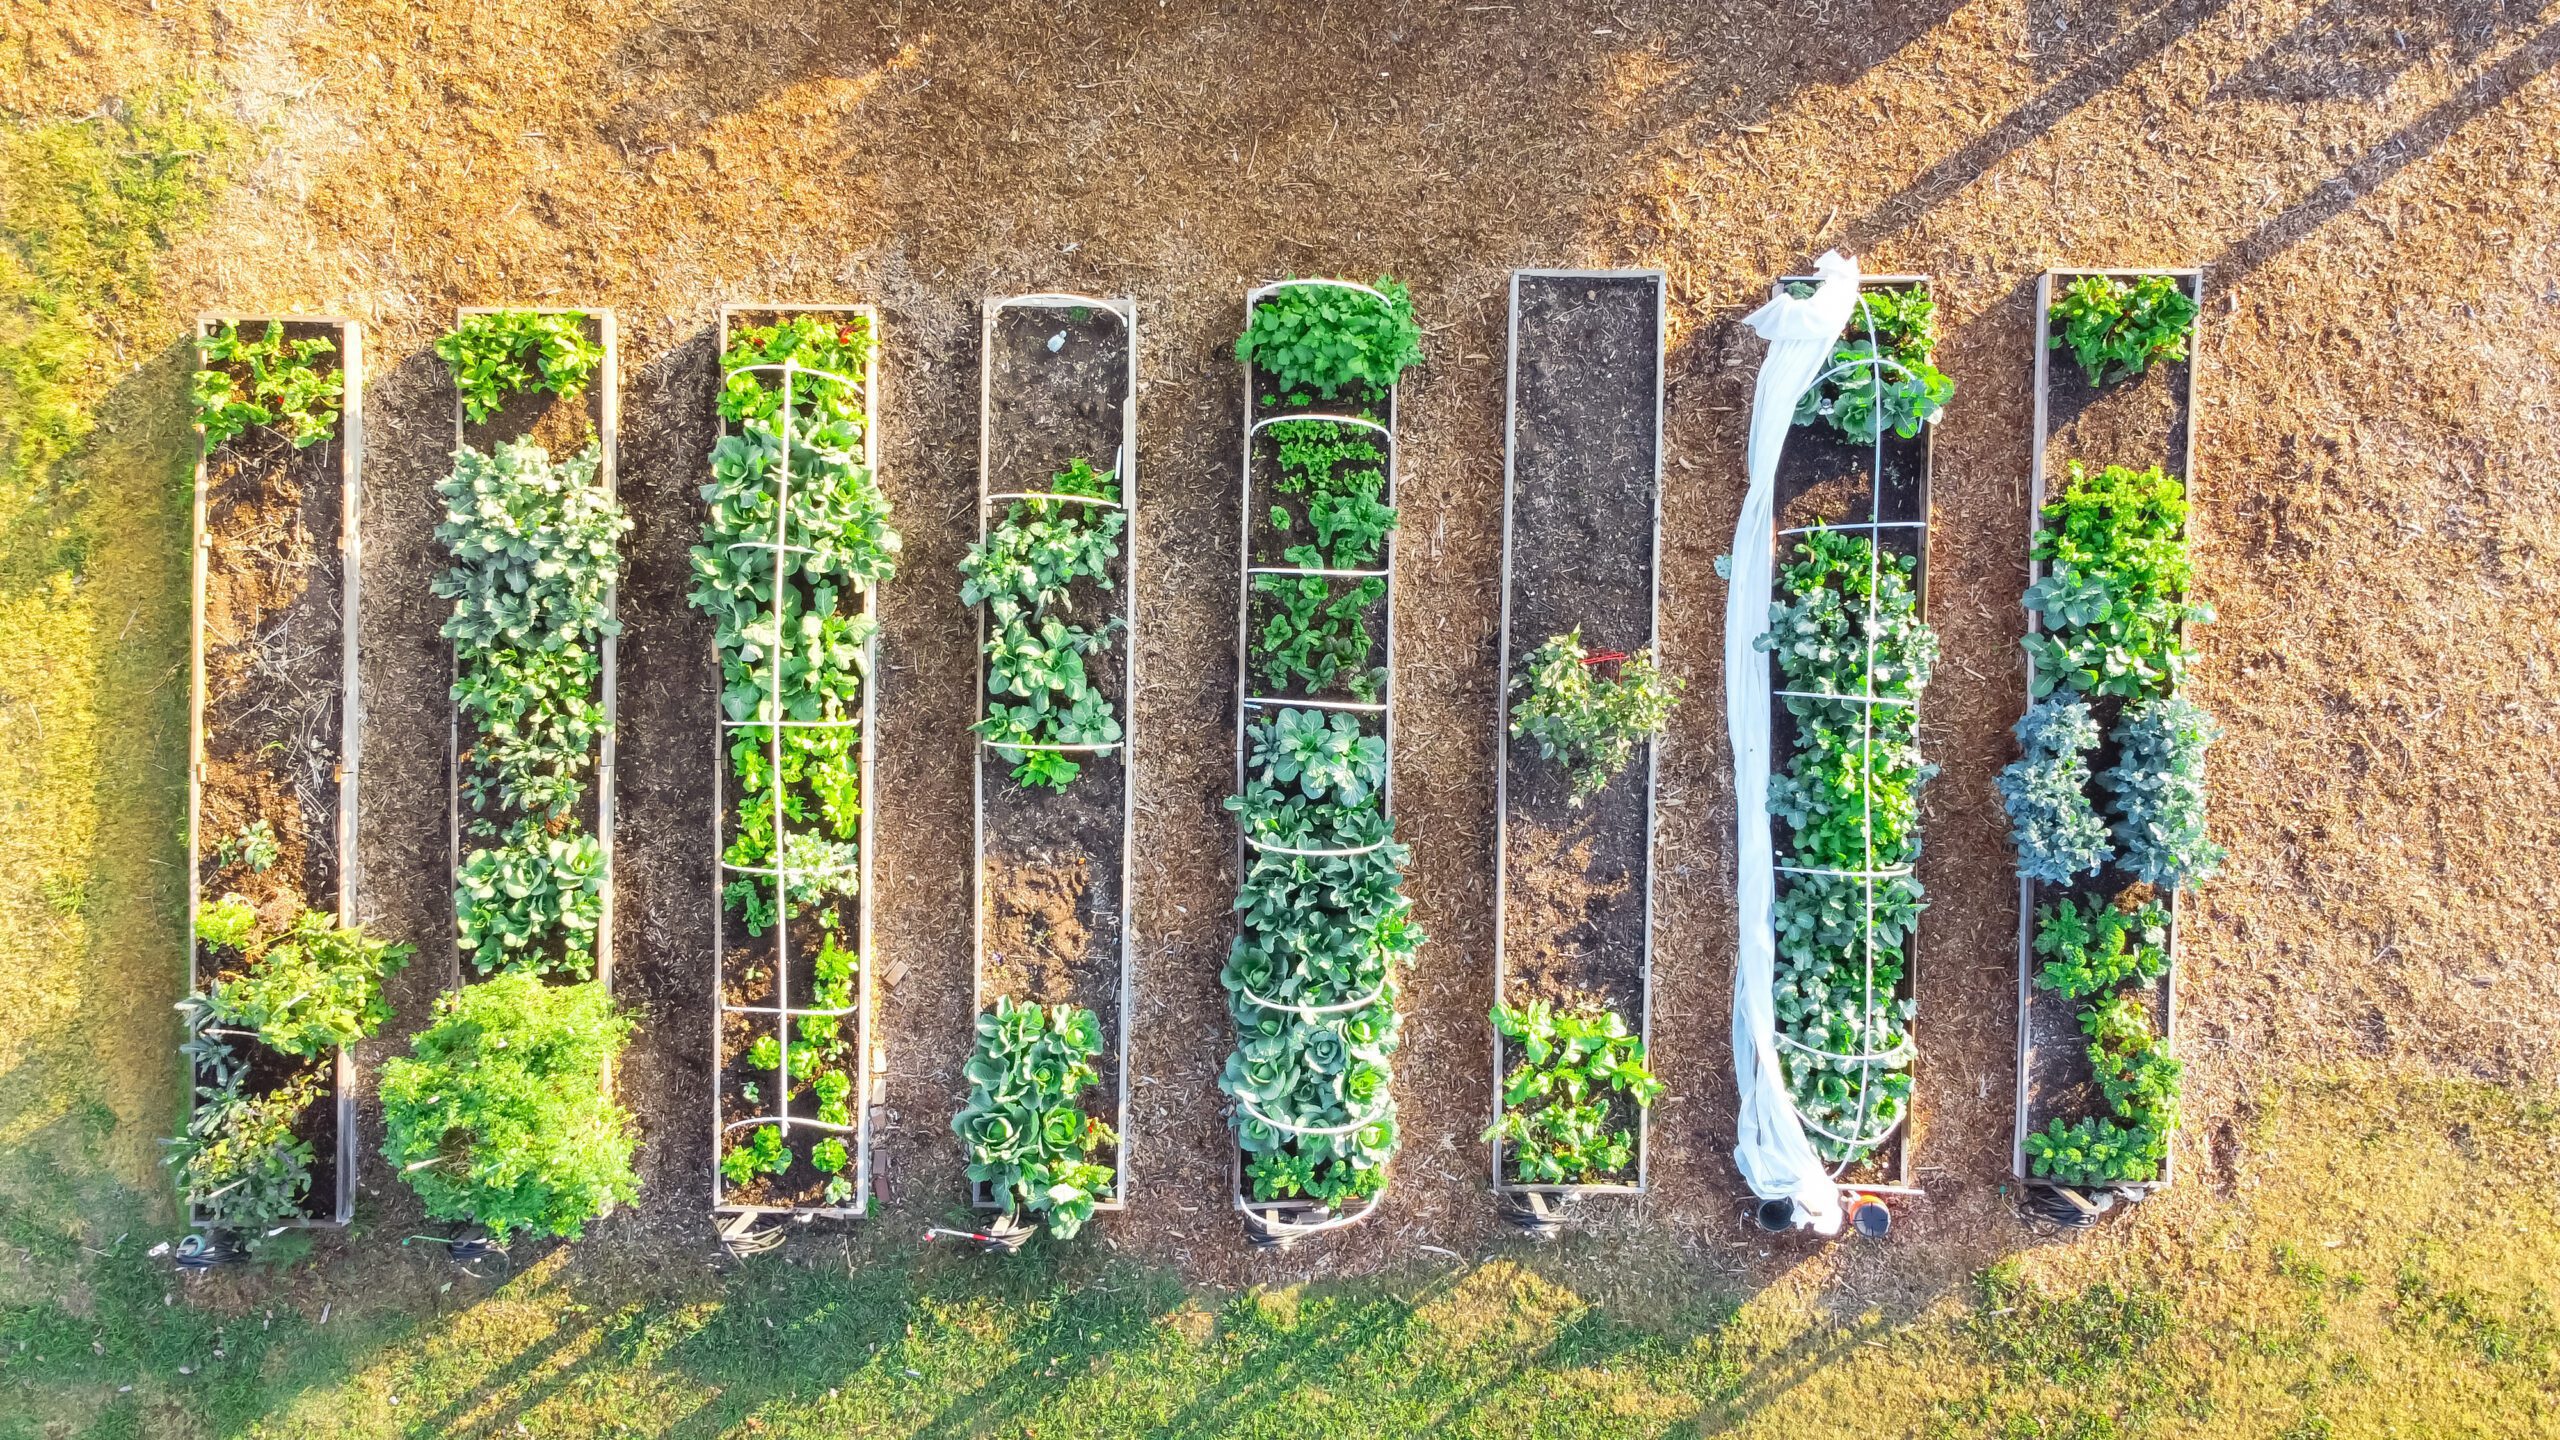 An aerial view of rows of raised garden beds.